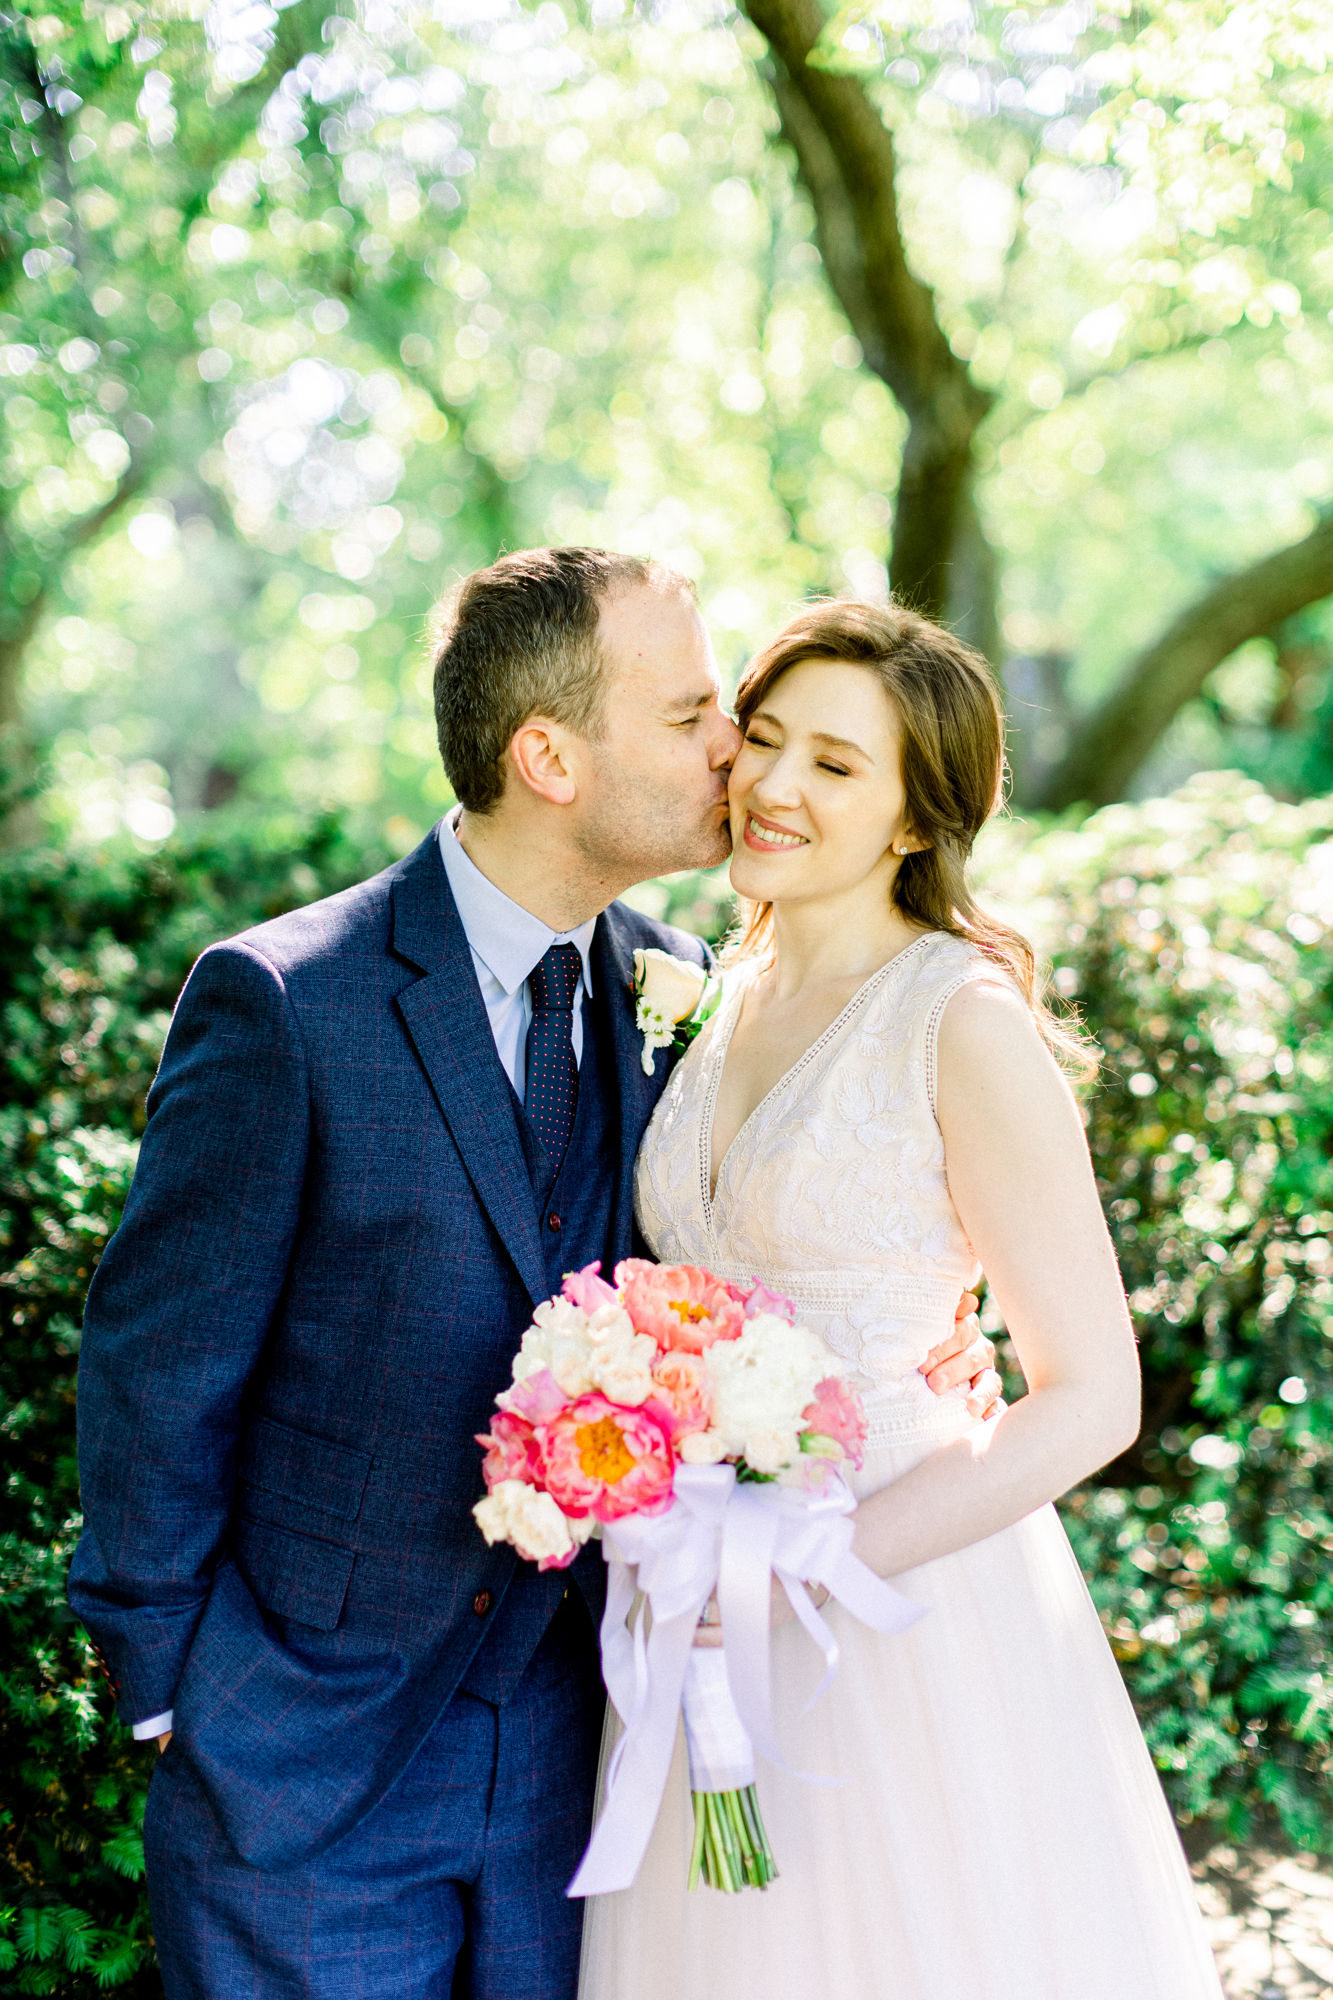 Beautiful Summer Wedding Photos at the Conservatory Garden in Central Park New York